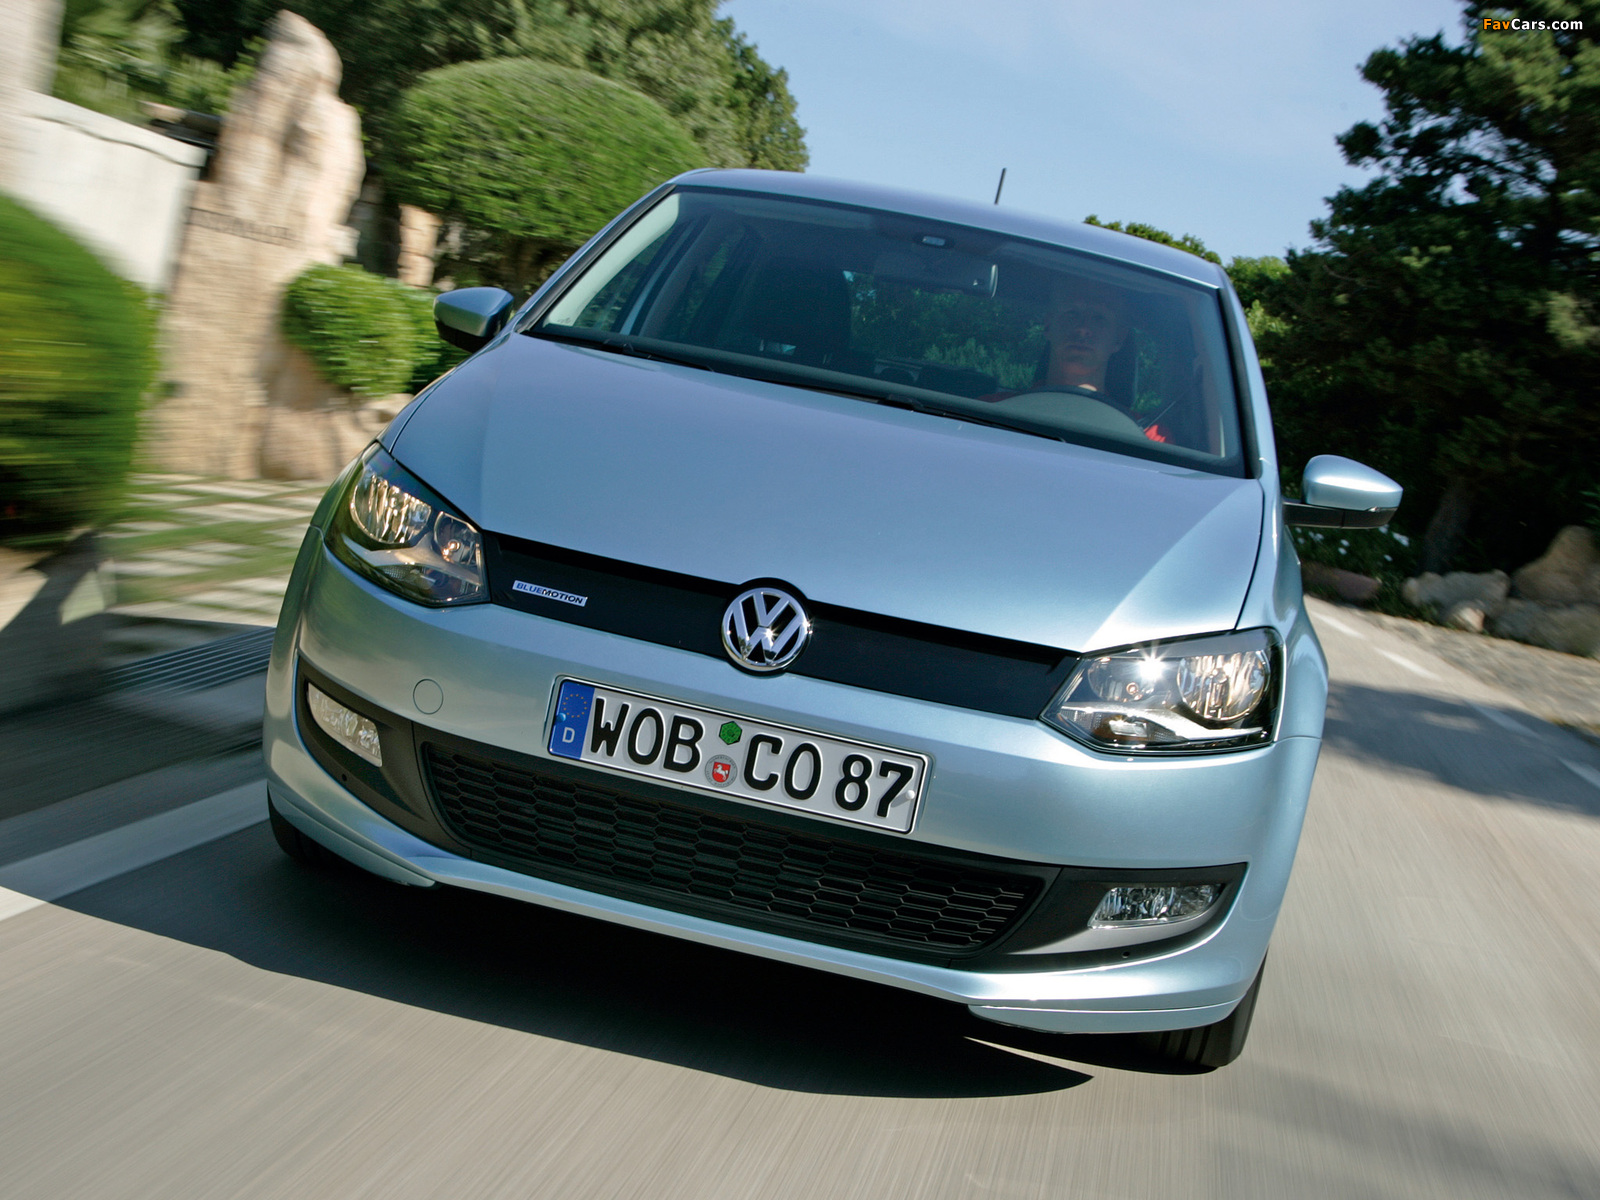 Volkswagen Polo BlueMotion Prototype (Typ 6R) 2009 images (1600 x 1200)